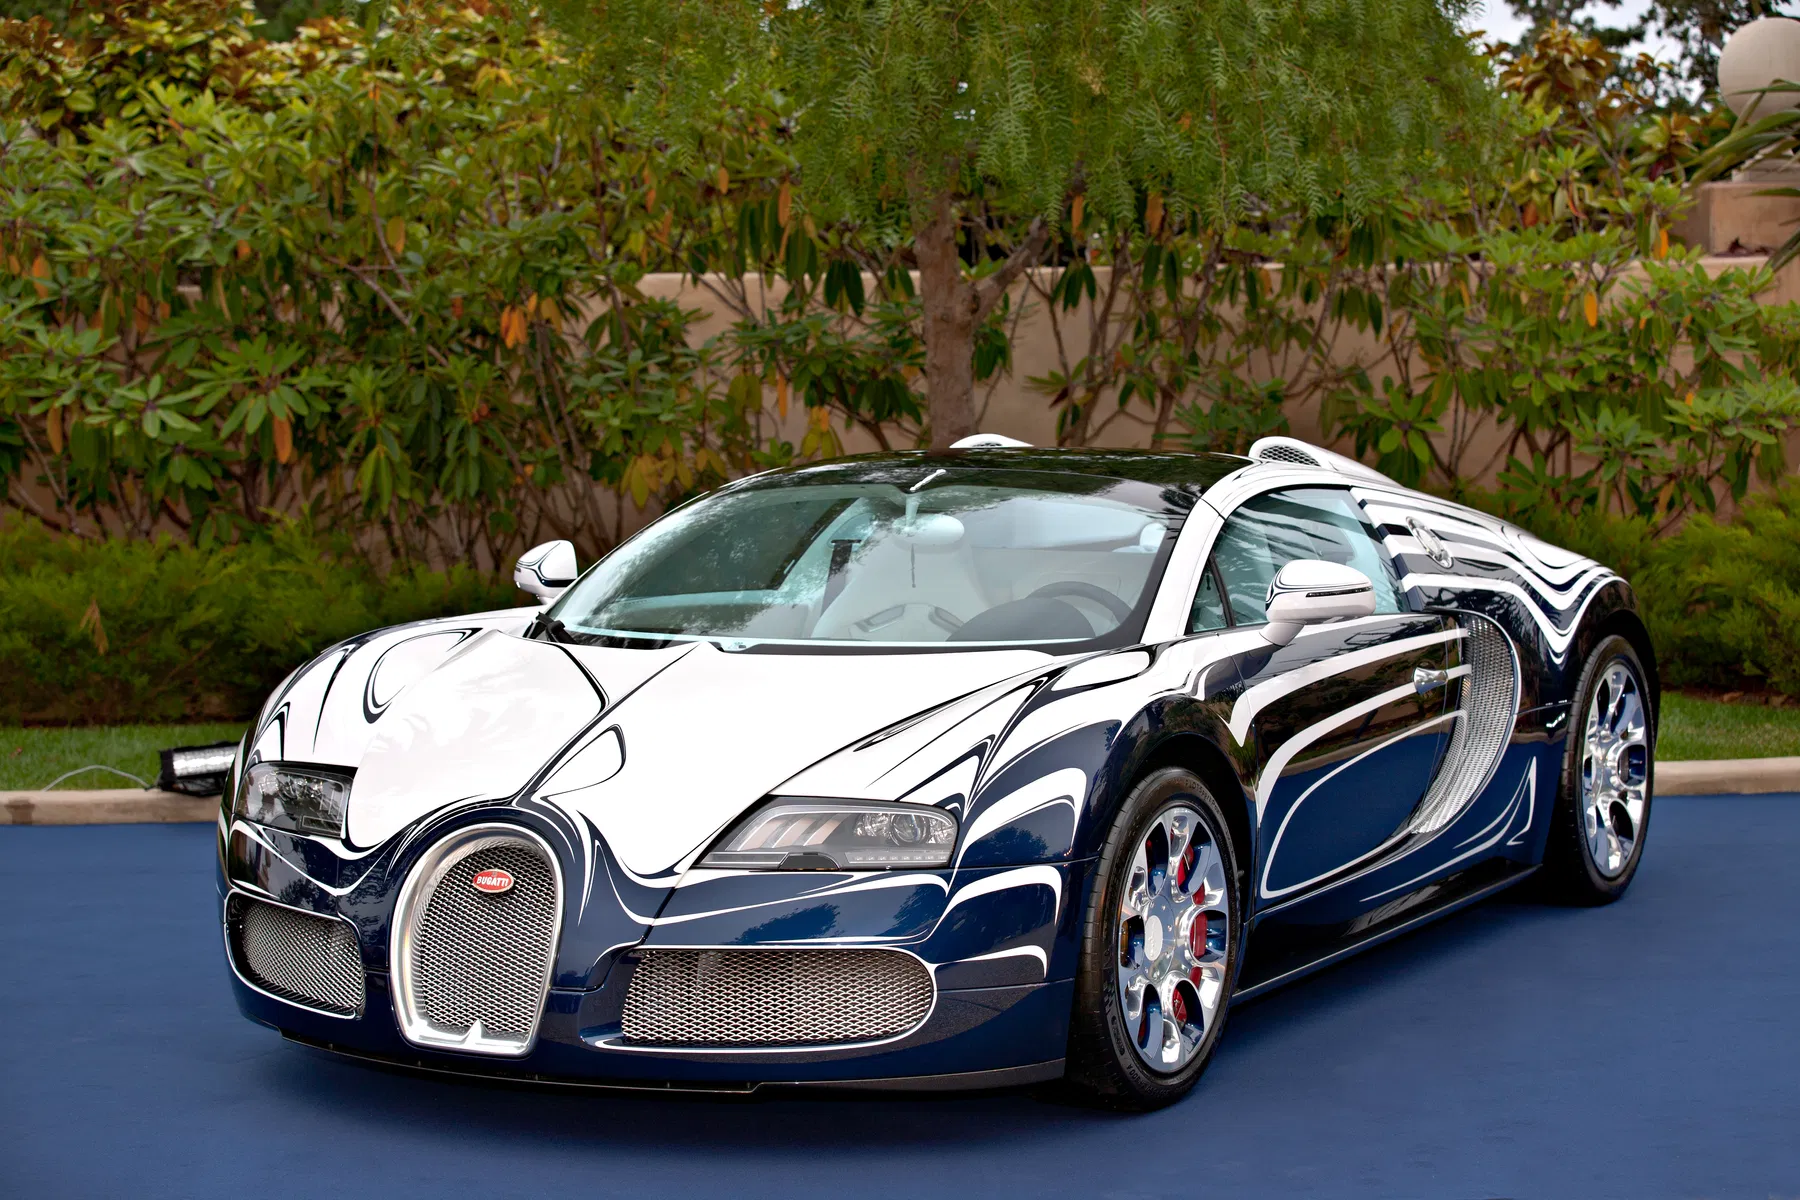 The Bugatti “L’Or Blanc” – The fastest porcelain in the world makes U.S. debut in California at The Quail, A Motorsports Gatherings